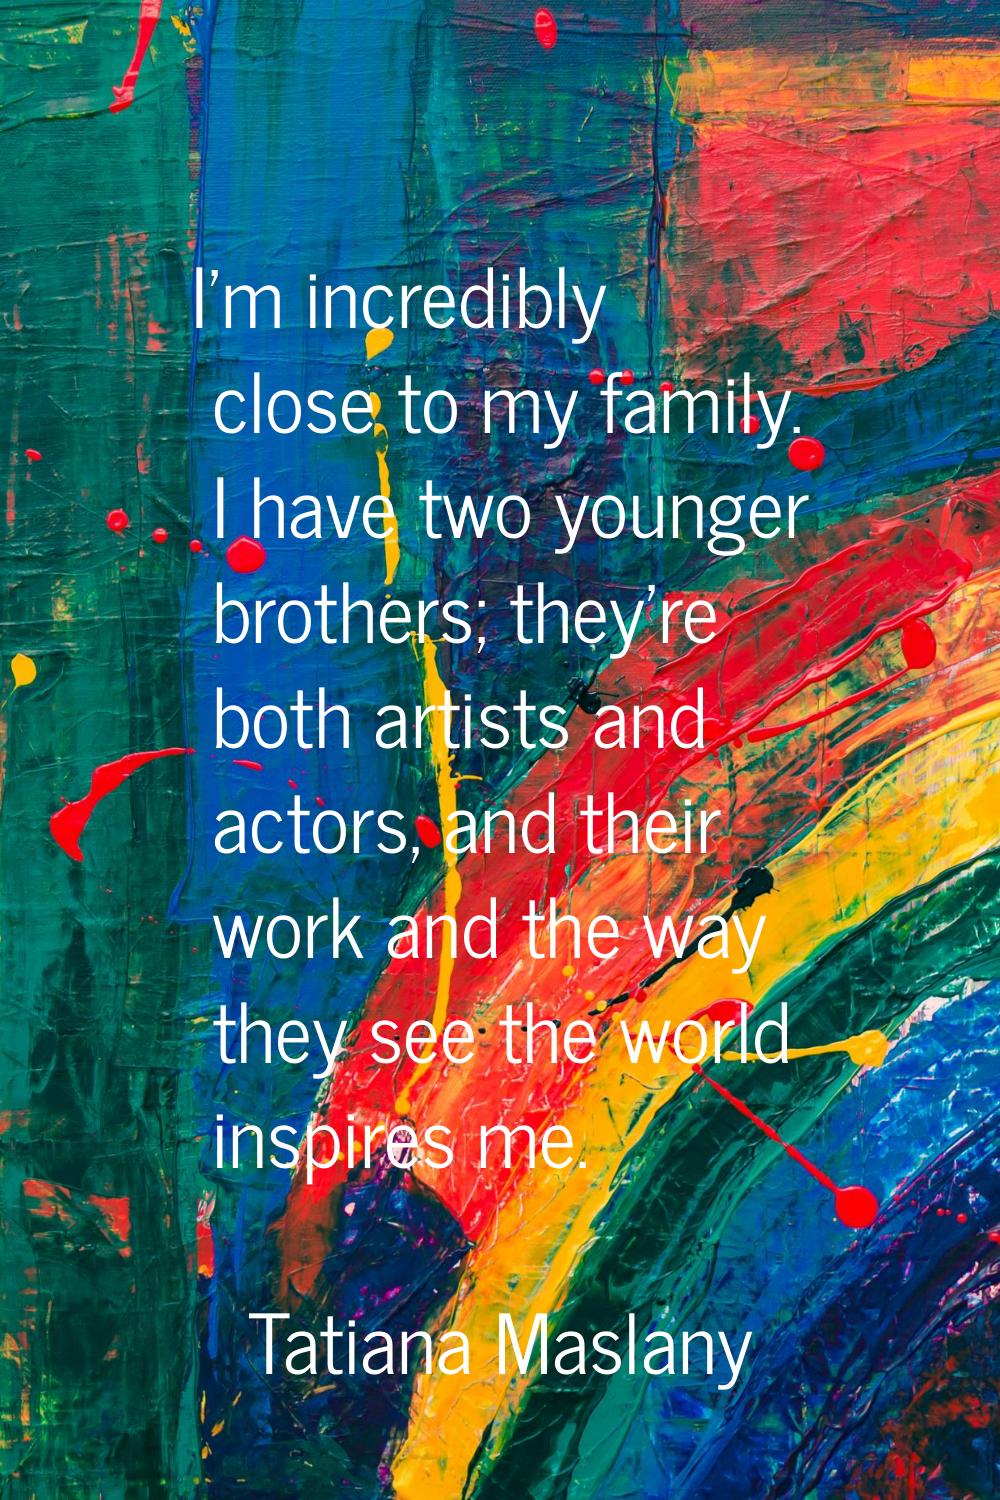 I'm incredibly close to my family. I have two younger brothers; they're both artists and actors, an